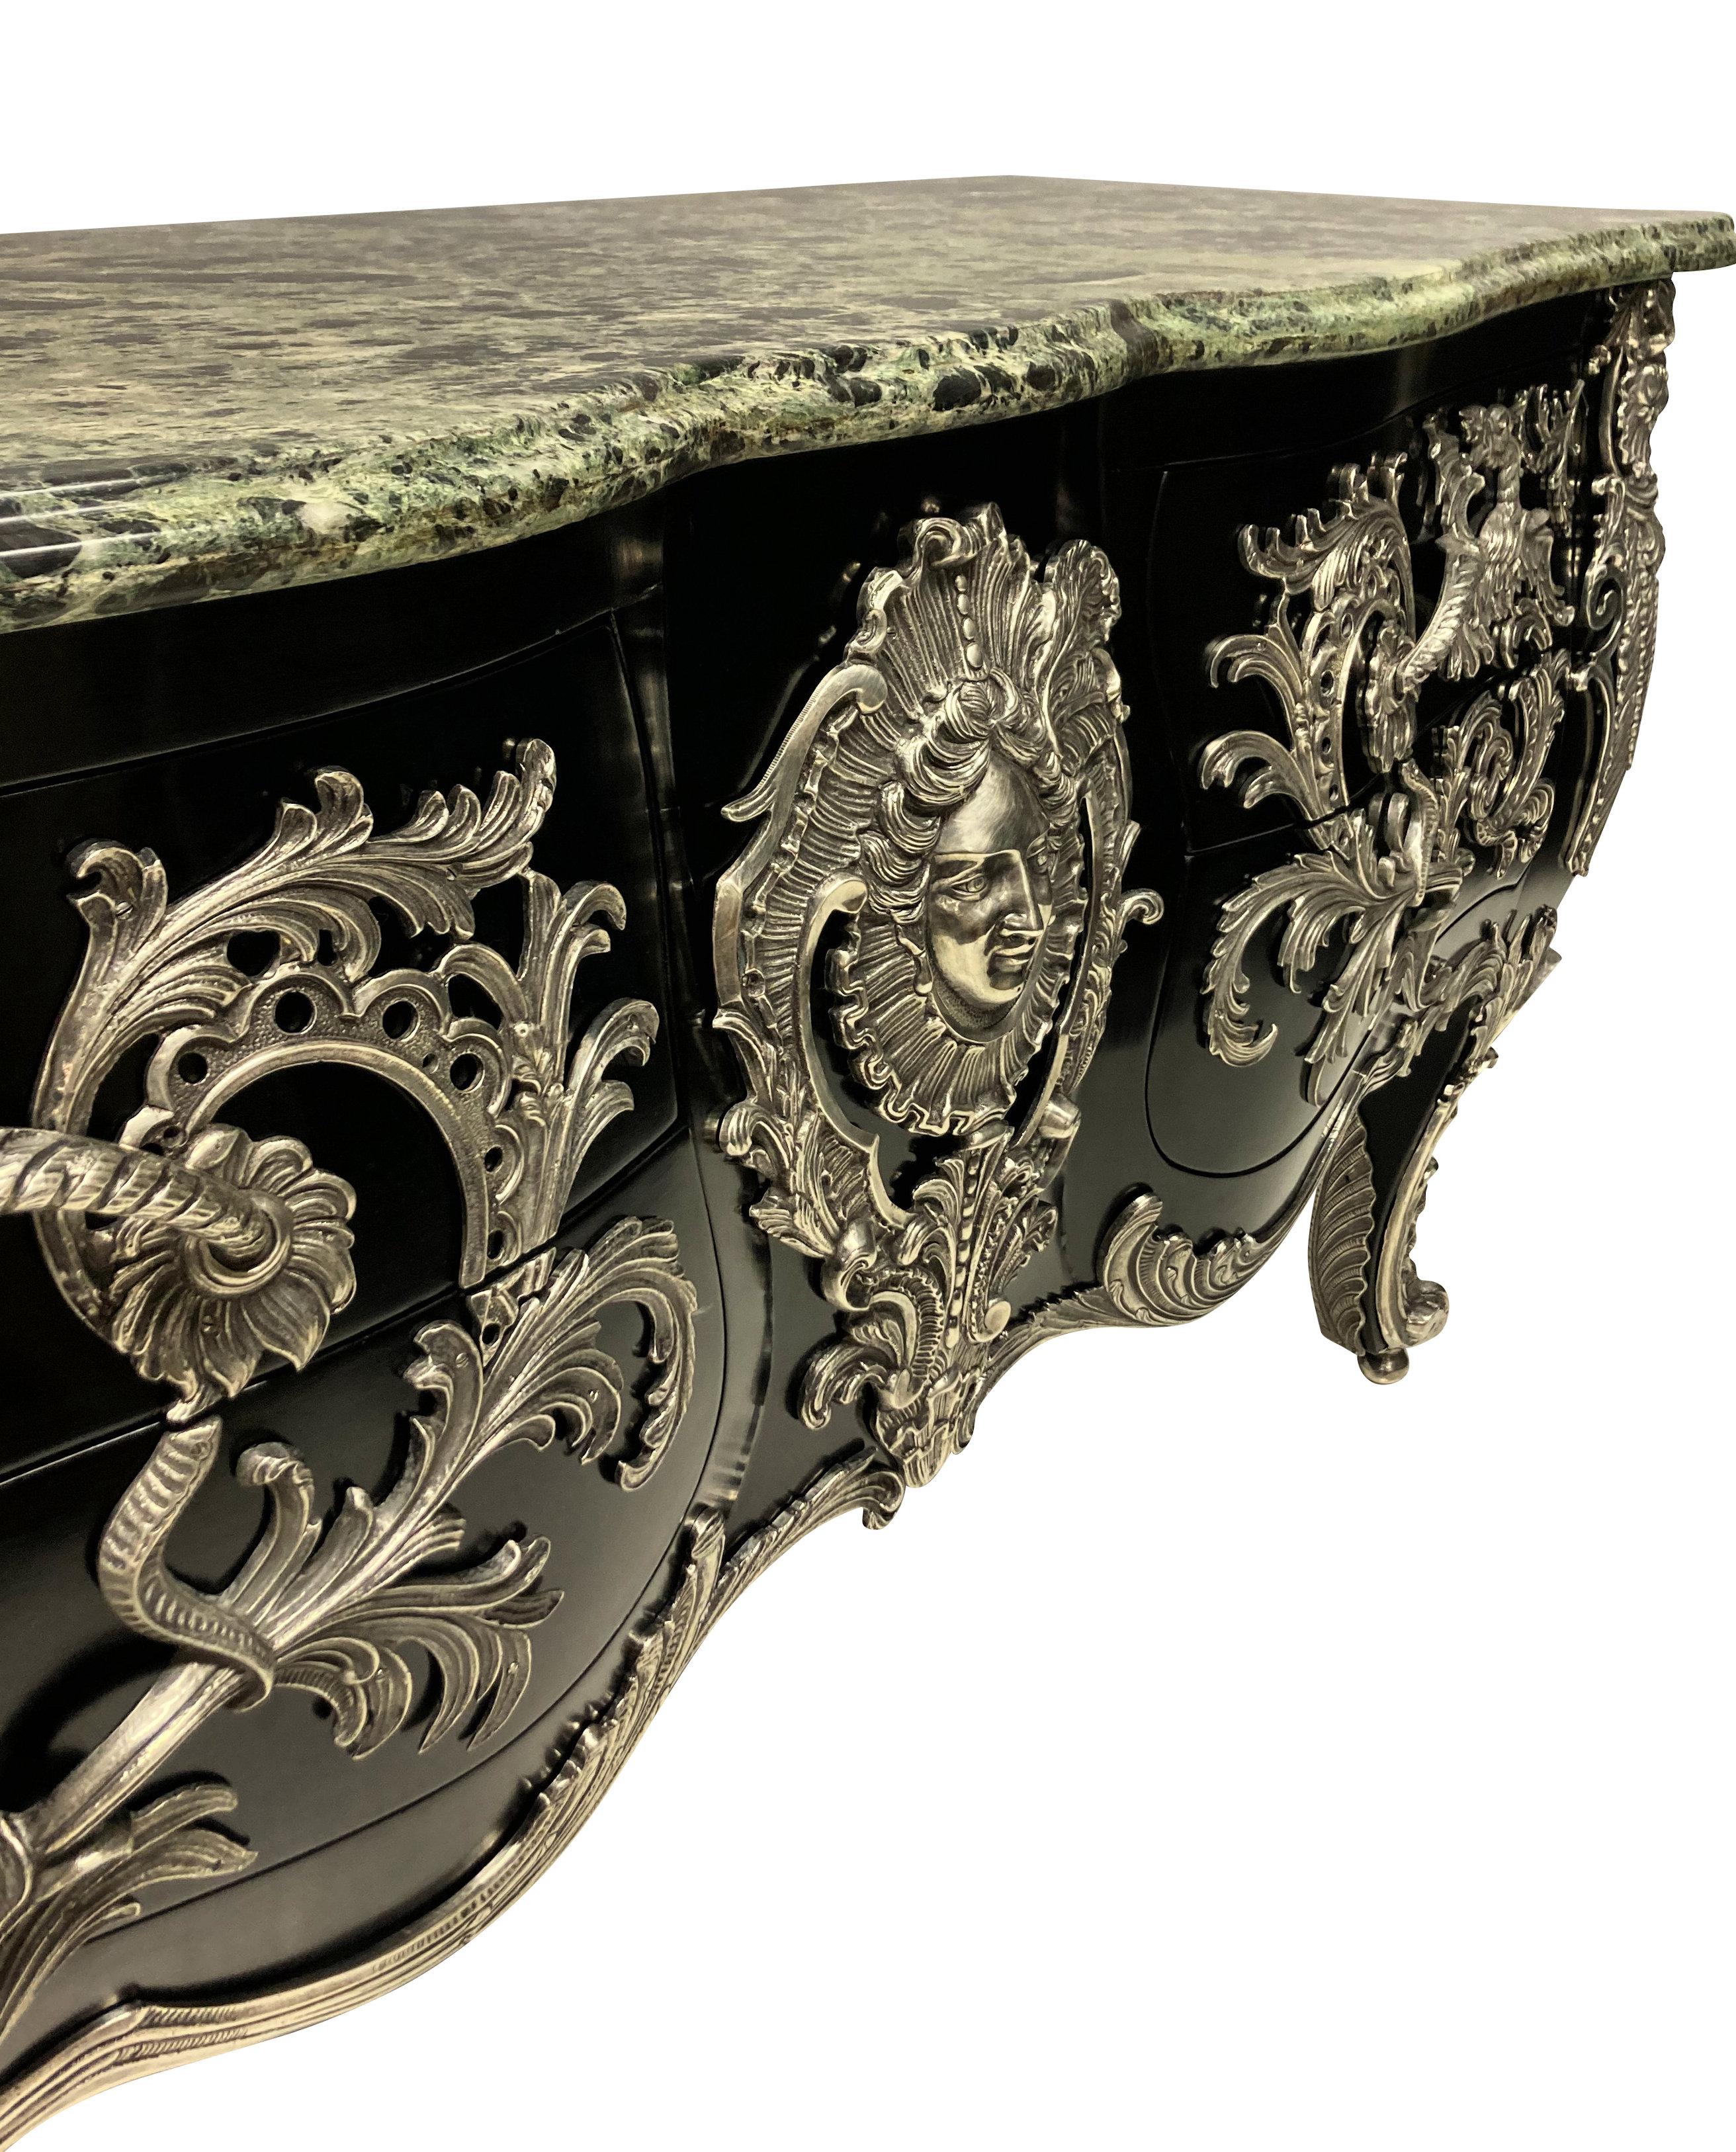 A monumental French commode a vantaux after François Linke's Antoine-Robert Gaudreaux model. The serpentine verde alpi marble top above a rocaille-framed Apollo mask and two pairs of serpentine drawers mounted with dragon and acanthus handles. The